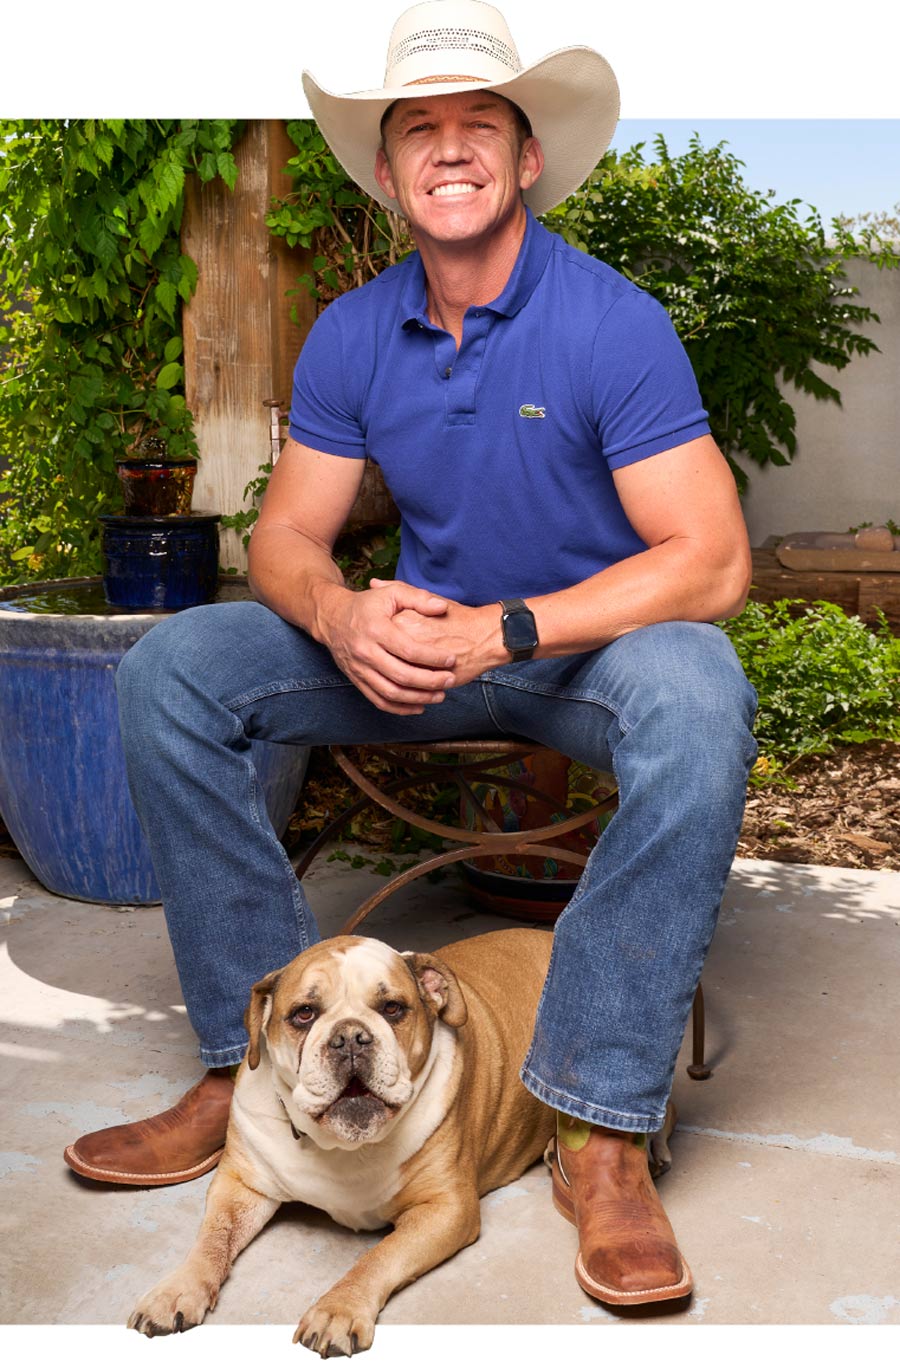 Scot Brown with his dog